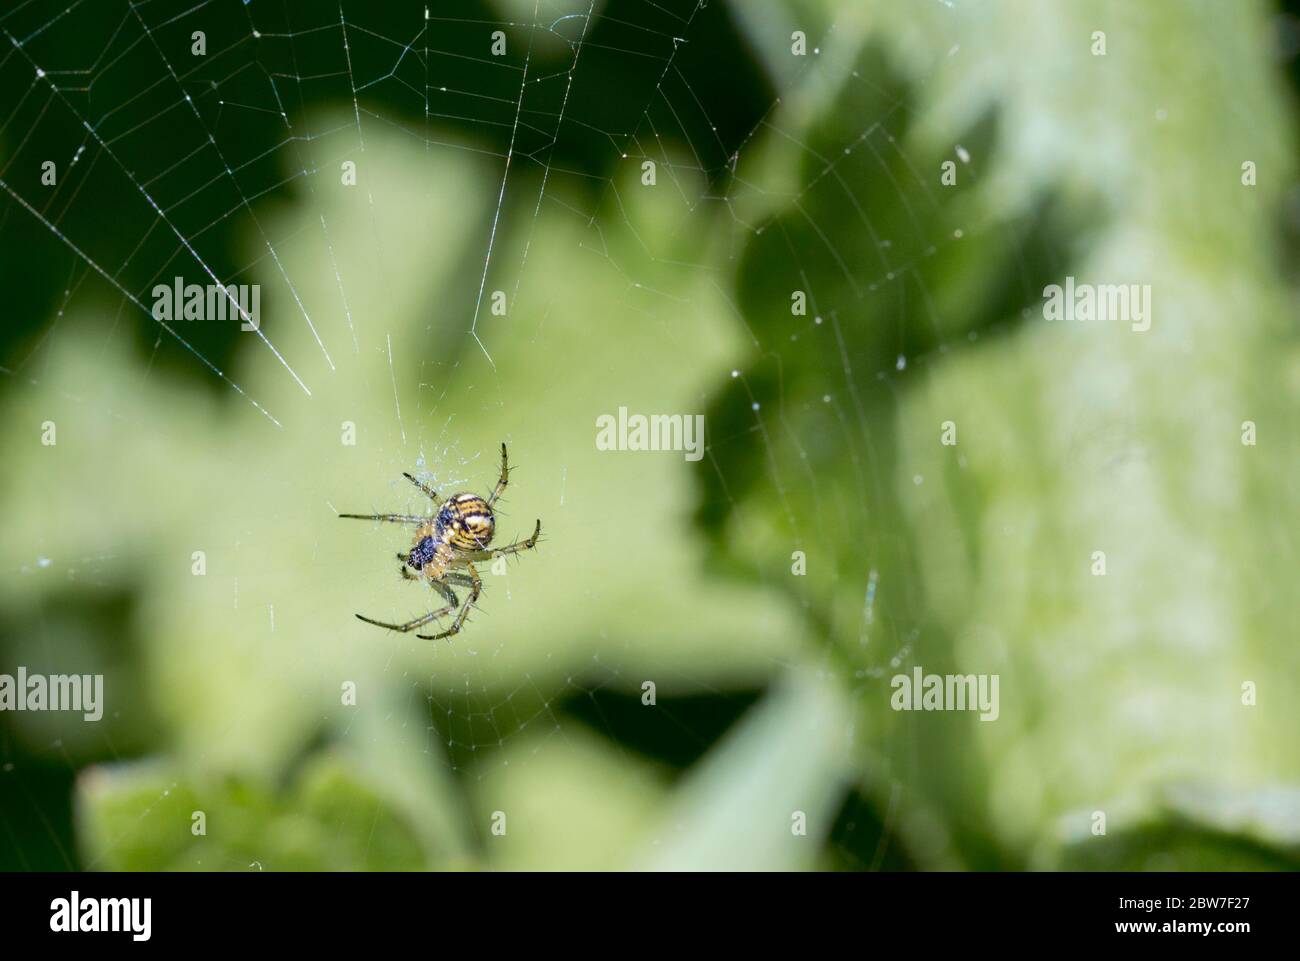 Small garden spider on web, amber yellow body white markings on rear end outlined in black, has square ring of white dots on underside of abdomen. Stock Photo